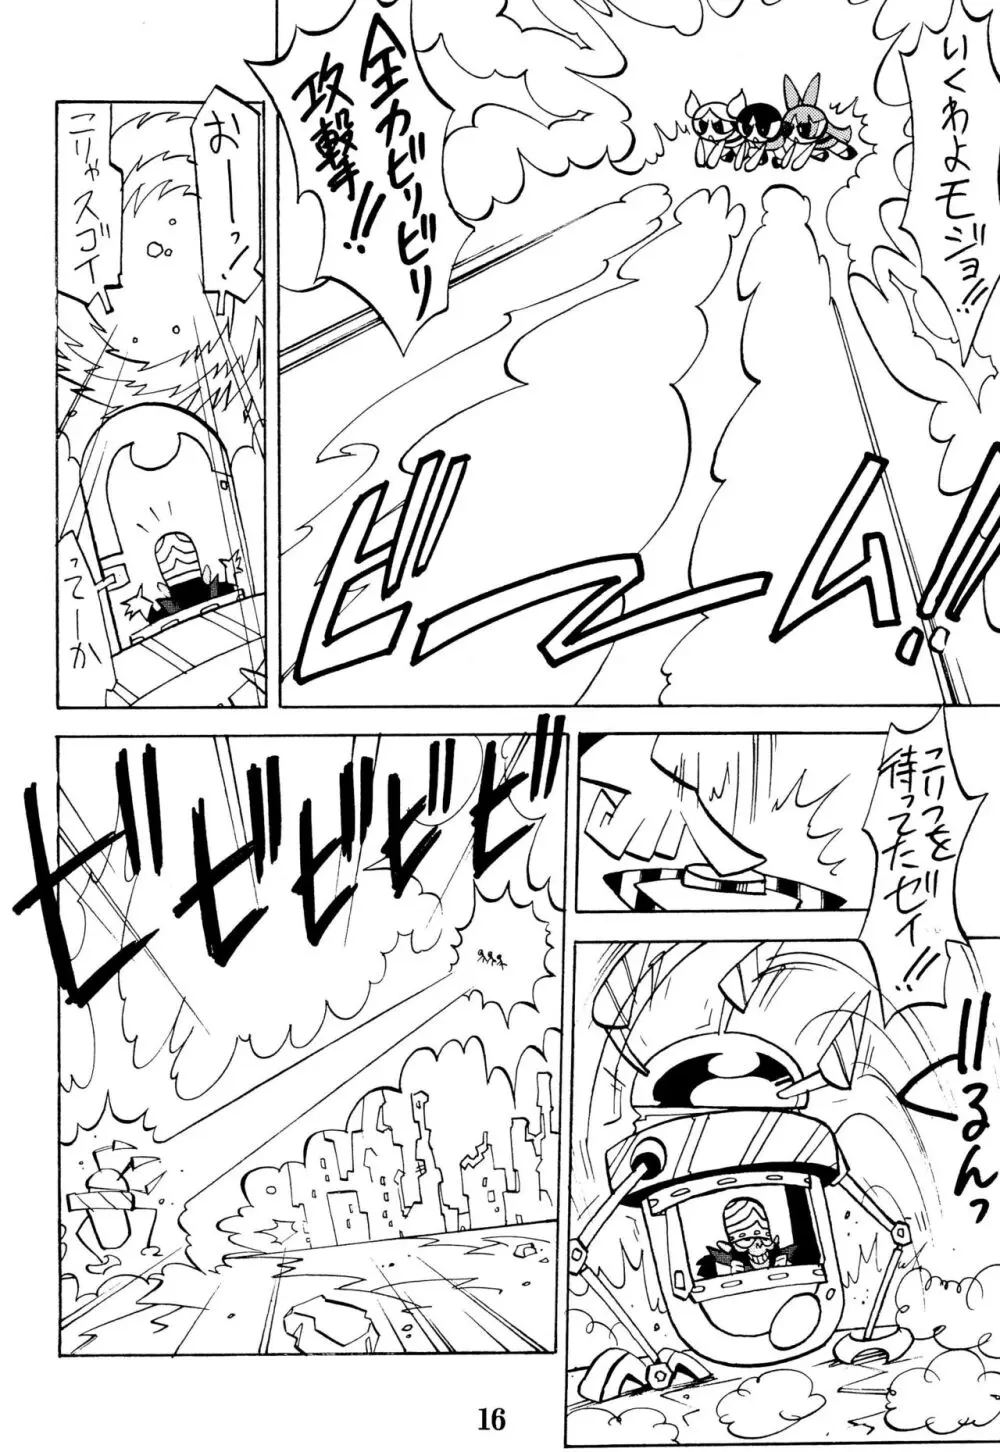 PPG FLASH! Page.18